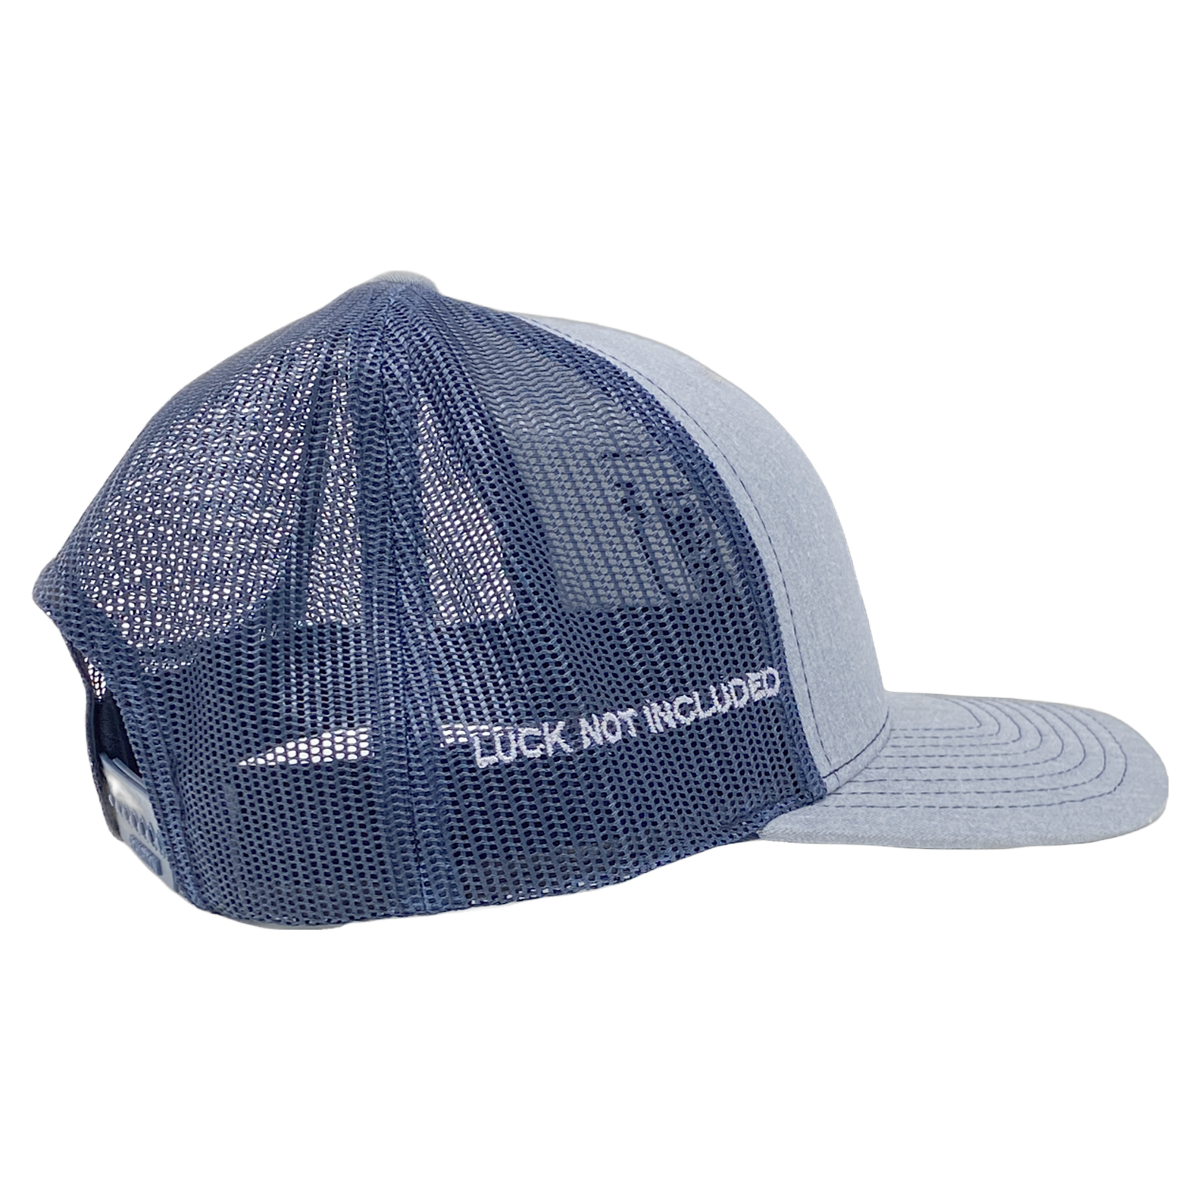 Blue Trucker Hat with Embroidered Blue "Notch 7" Logo